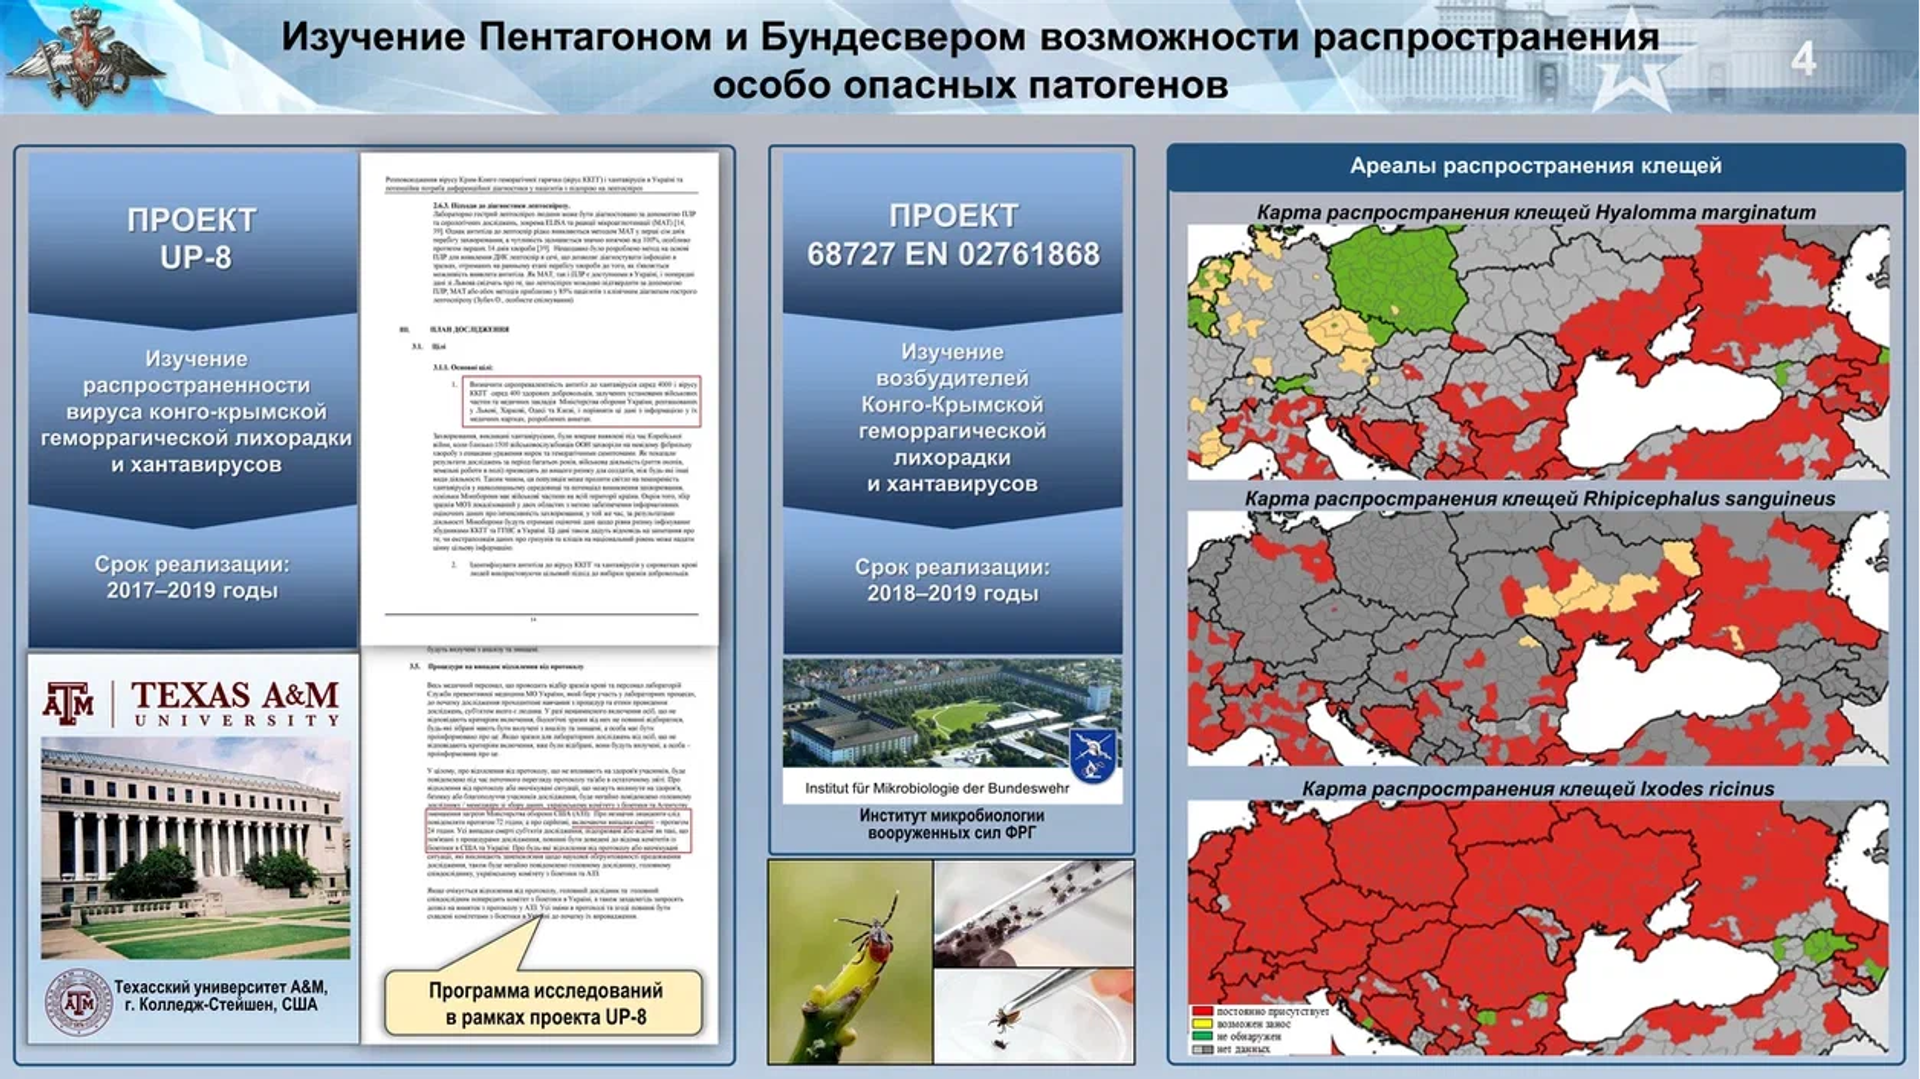 Russian Defense Ministry slide detailing US and German biological activities in Ukraine, including the study of tick-borne diseases. Maps to right show prevalence of various ticks. - Sputnik International, 1920, 07.07.2022